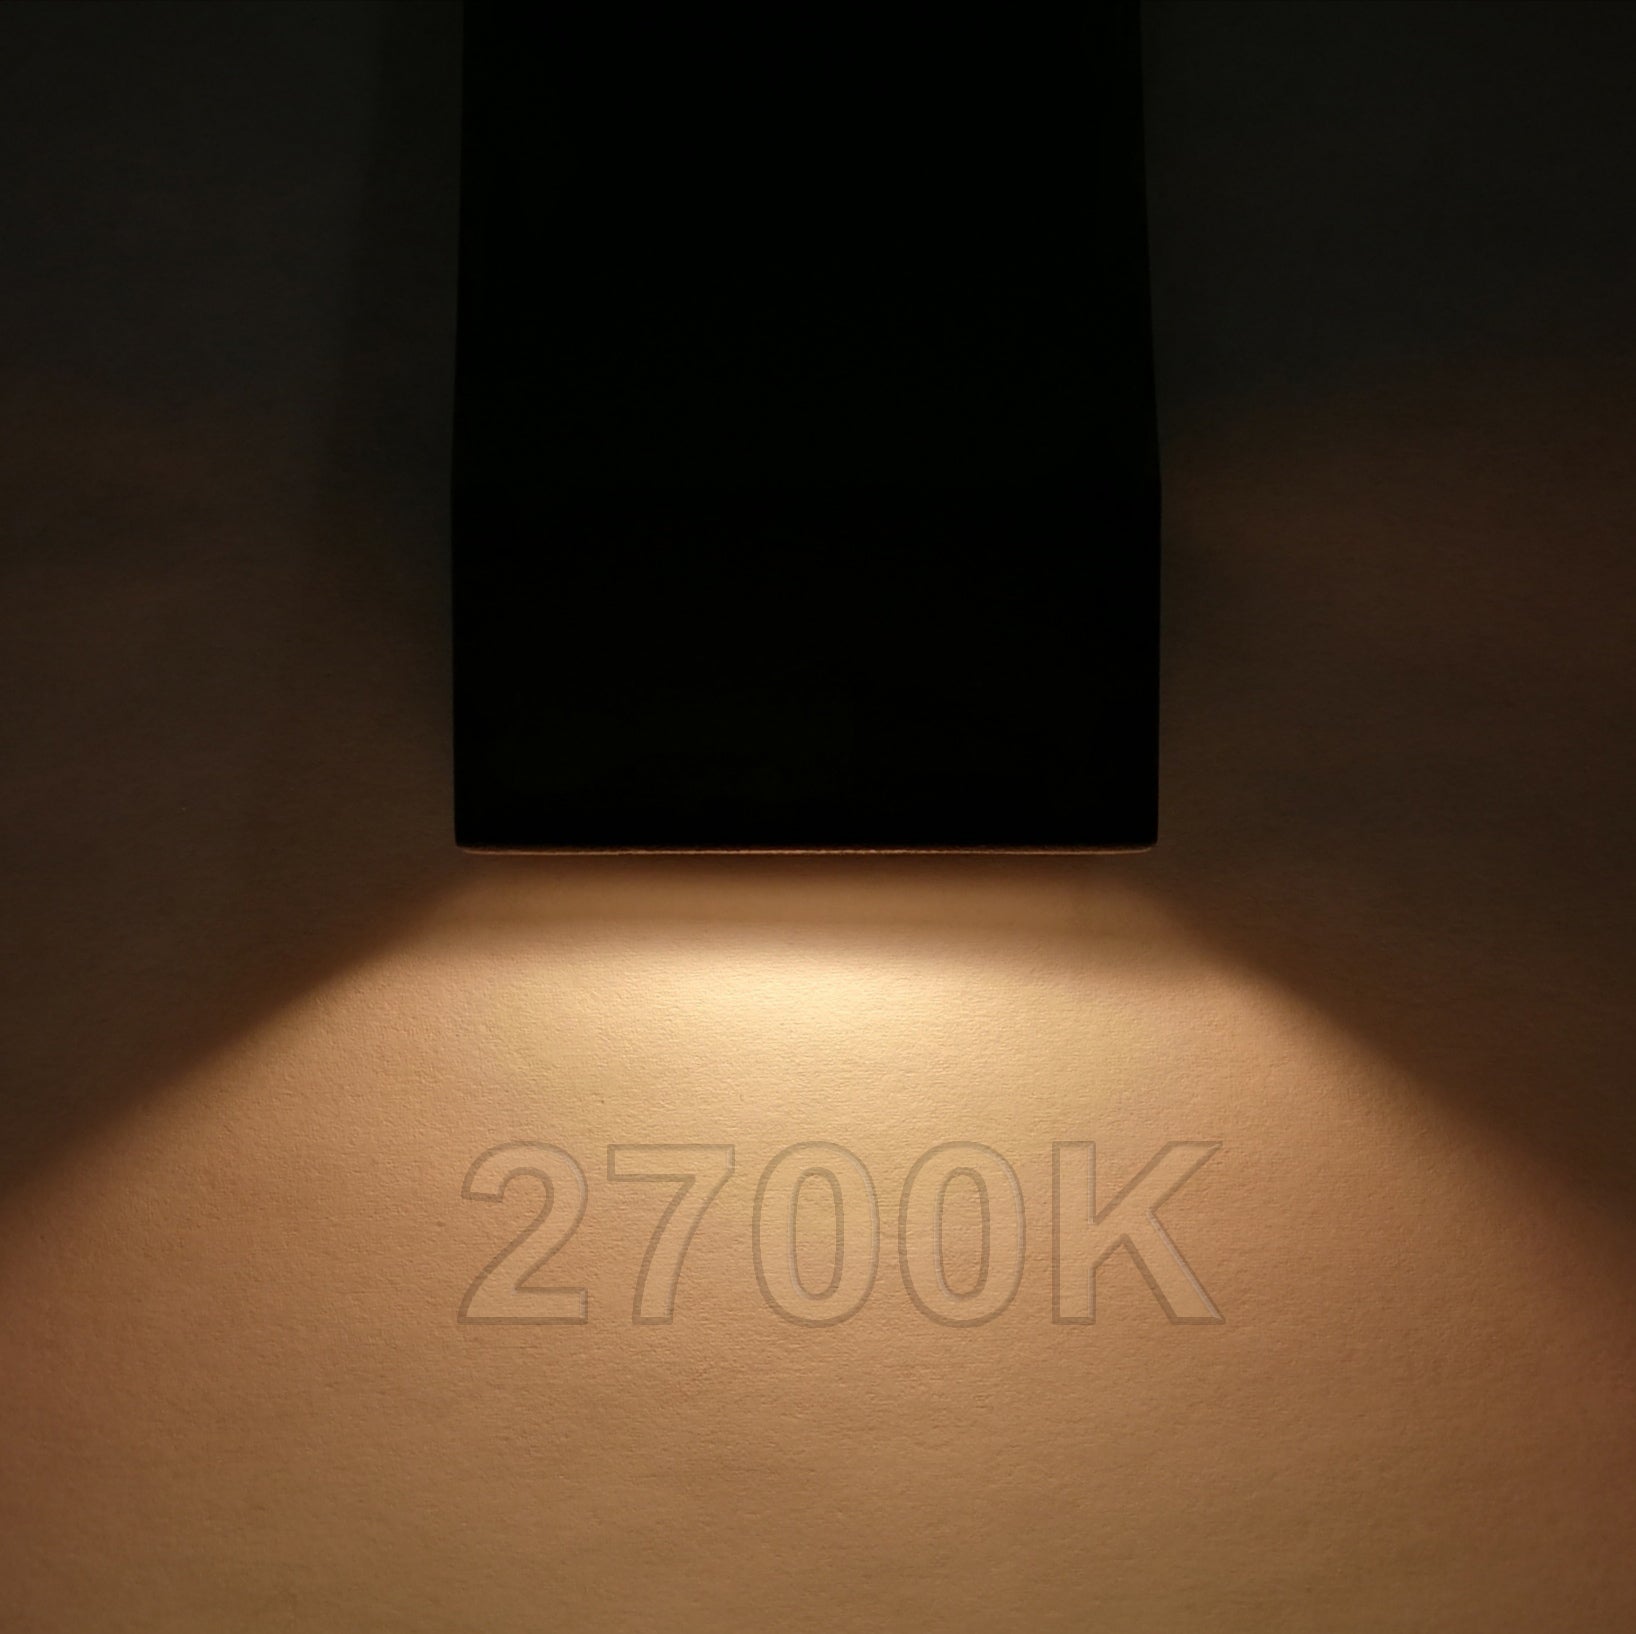 2W 2700K integrated LED chips deliver warm and soft white down light which is not too much for posts and steps. The full cutoff design eliminates annoying glare.